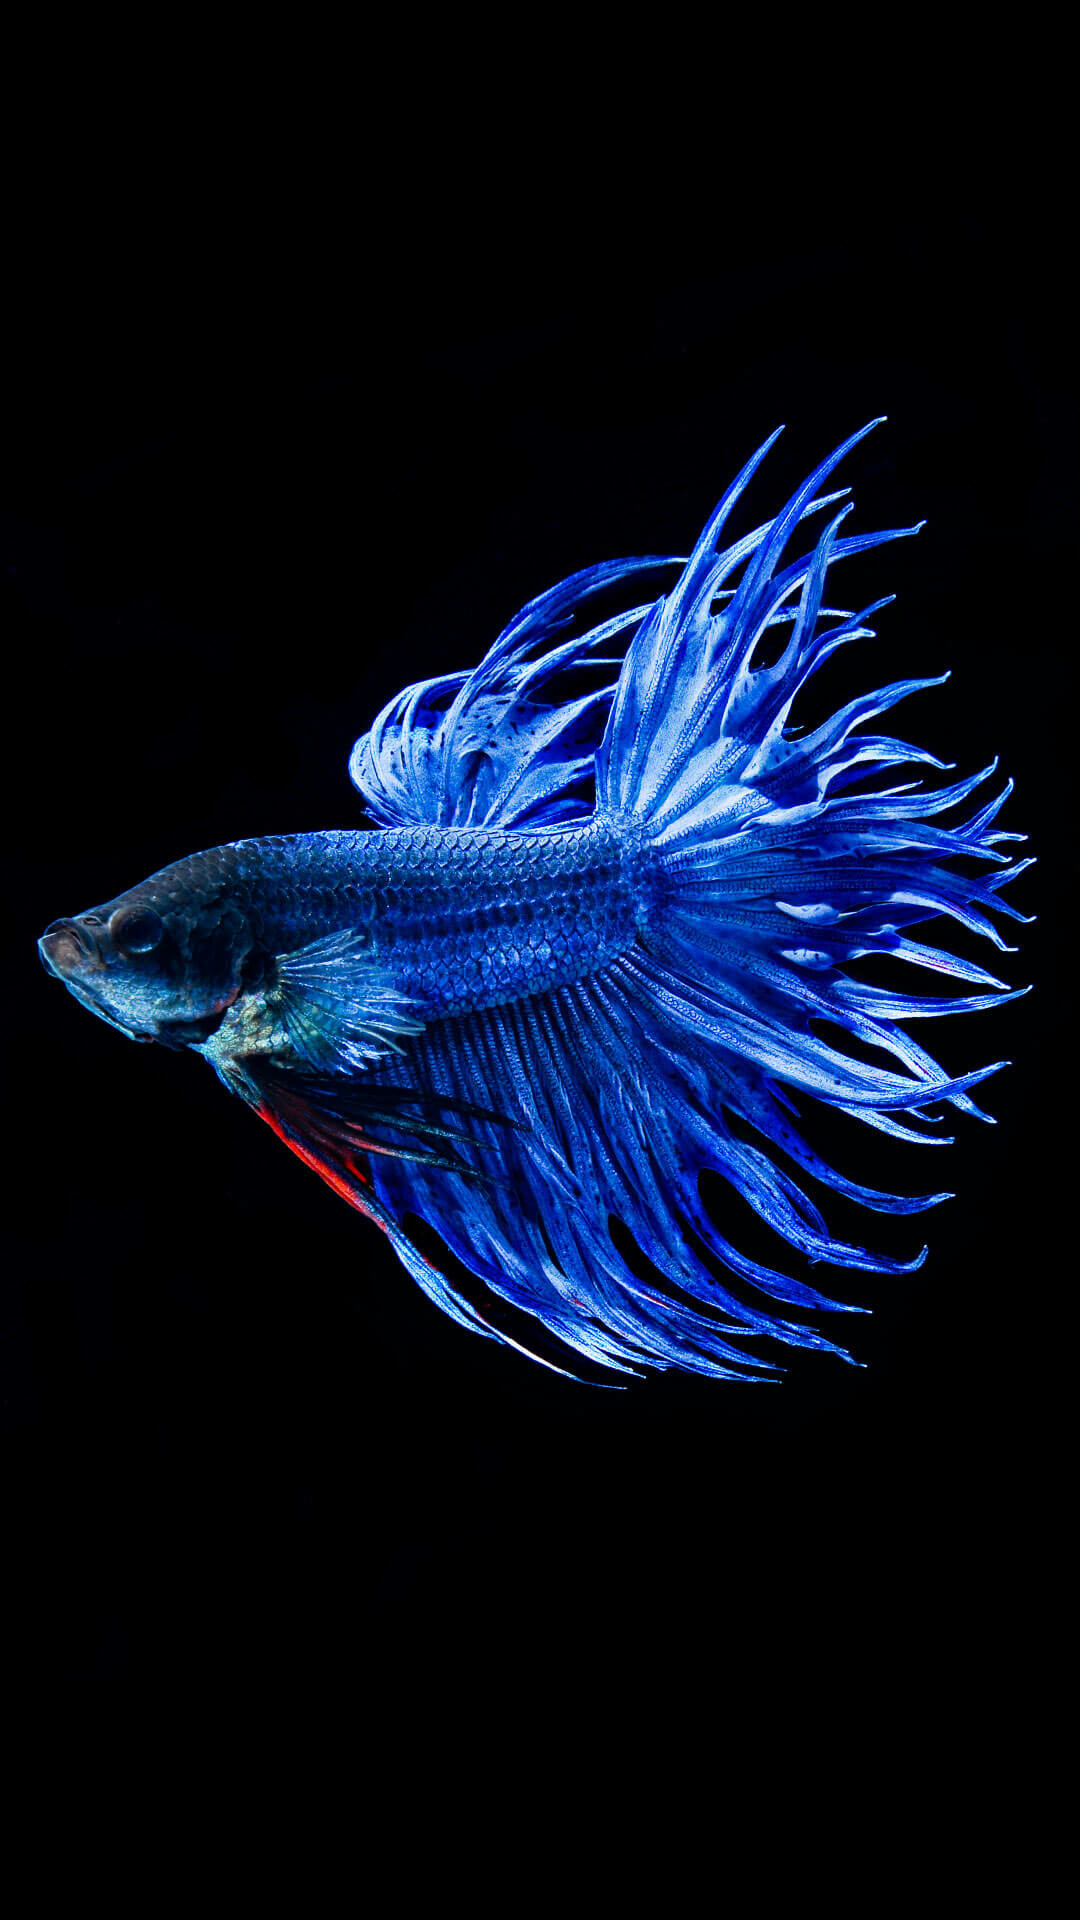 Fish: Betta, One of the most popular aquarium species because of its hardiness, beautiful, bold color. 1080x1920 Full HD Background.